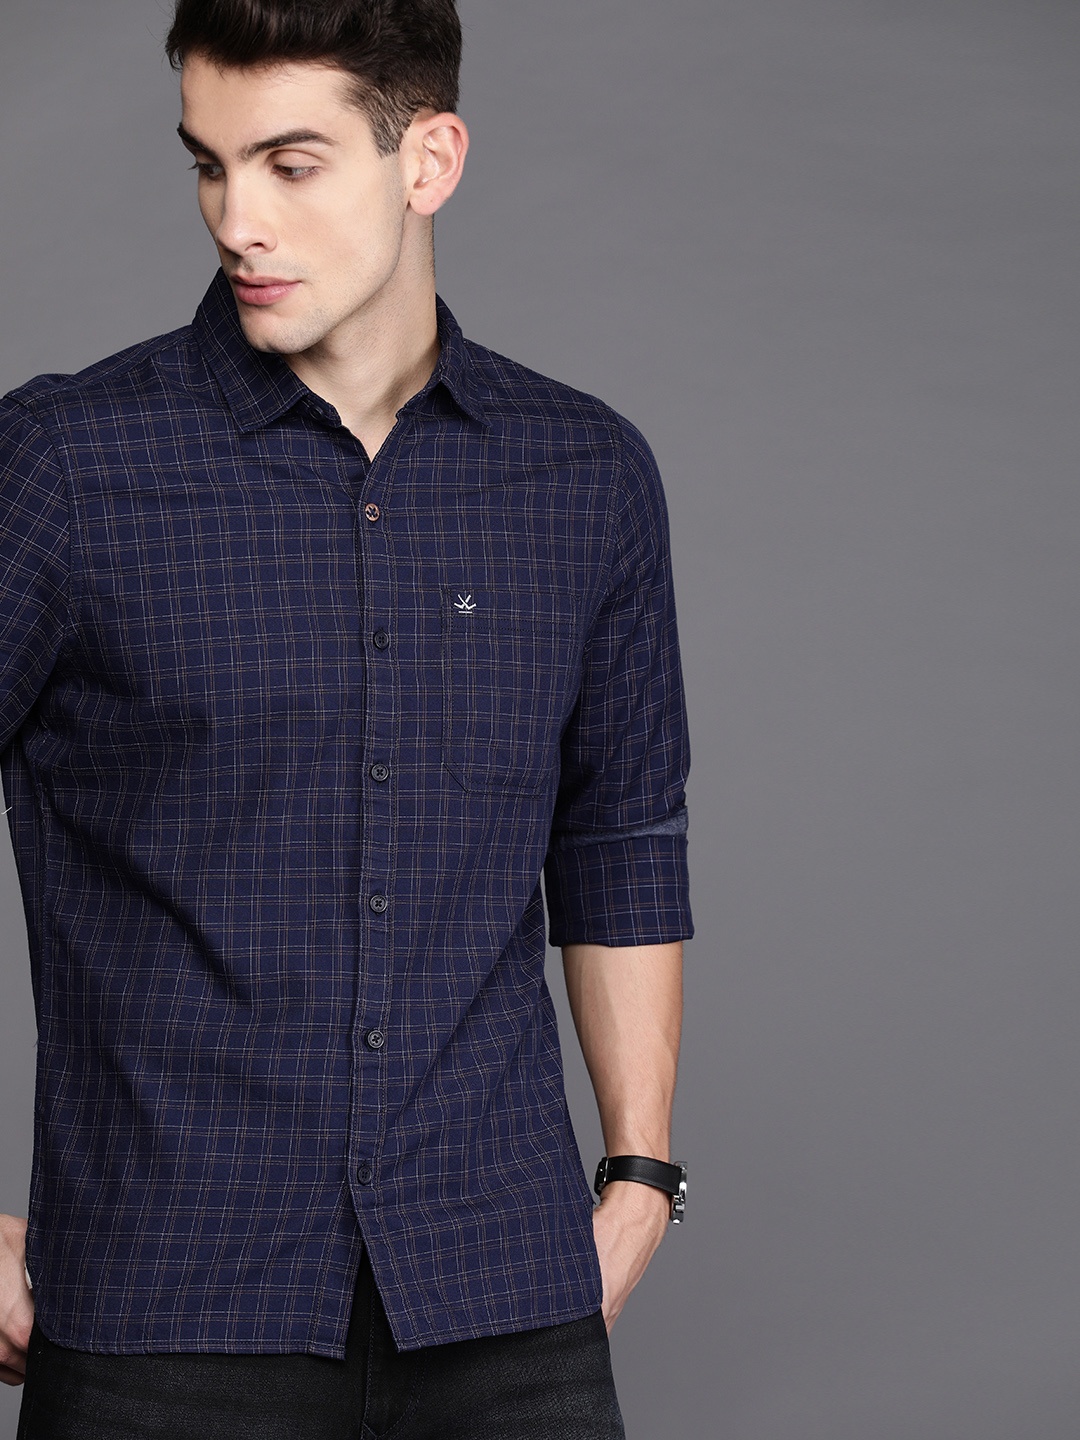 

WROGN Men Navy Blue & White Slim Fit Checked Casual Shirt